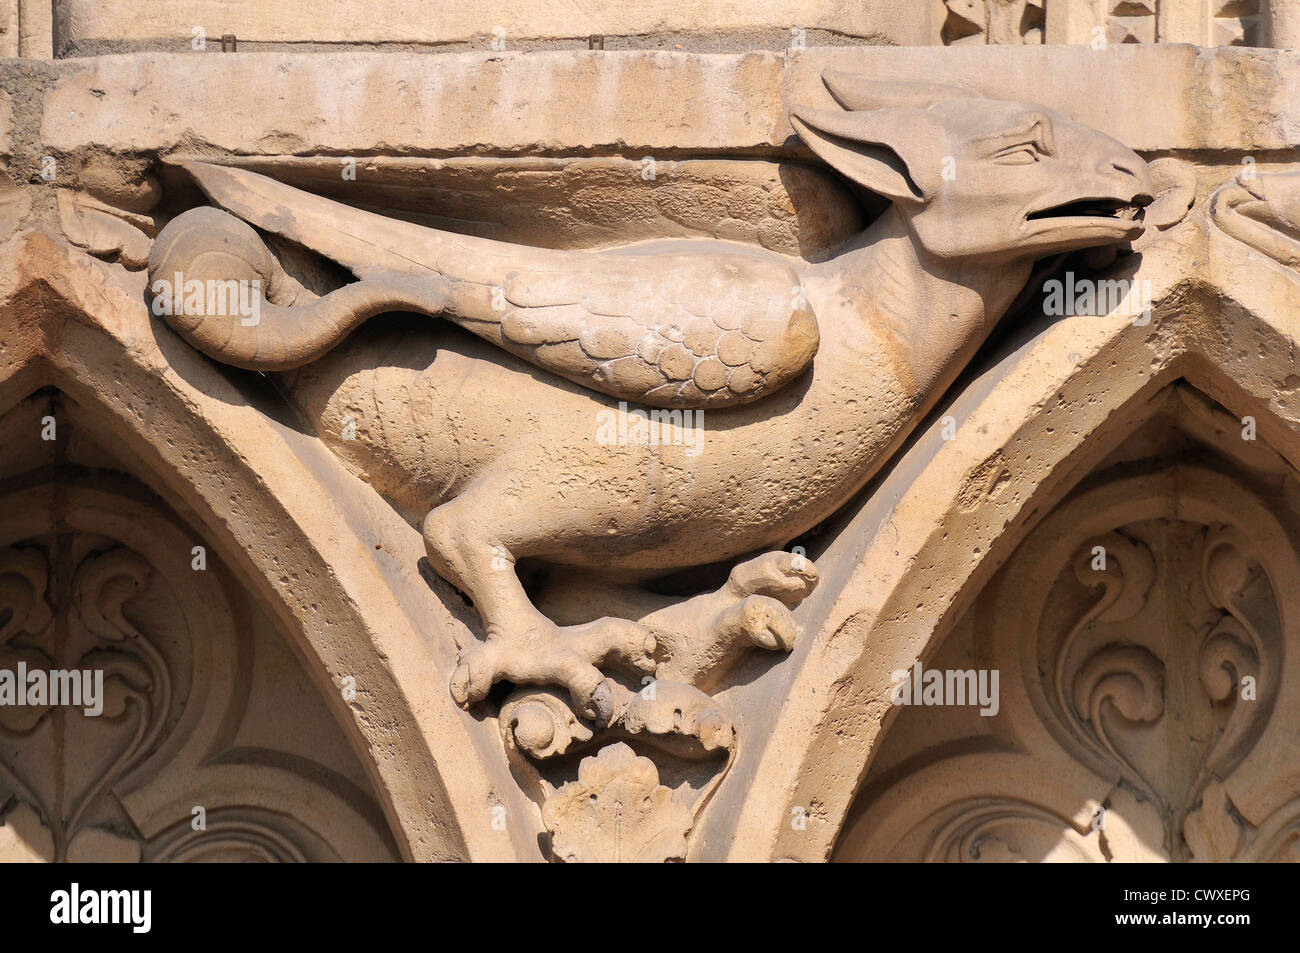 Paris, France. Notre Dame cathedral - facade detail. Carved stone bird Stock Photo